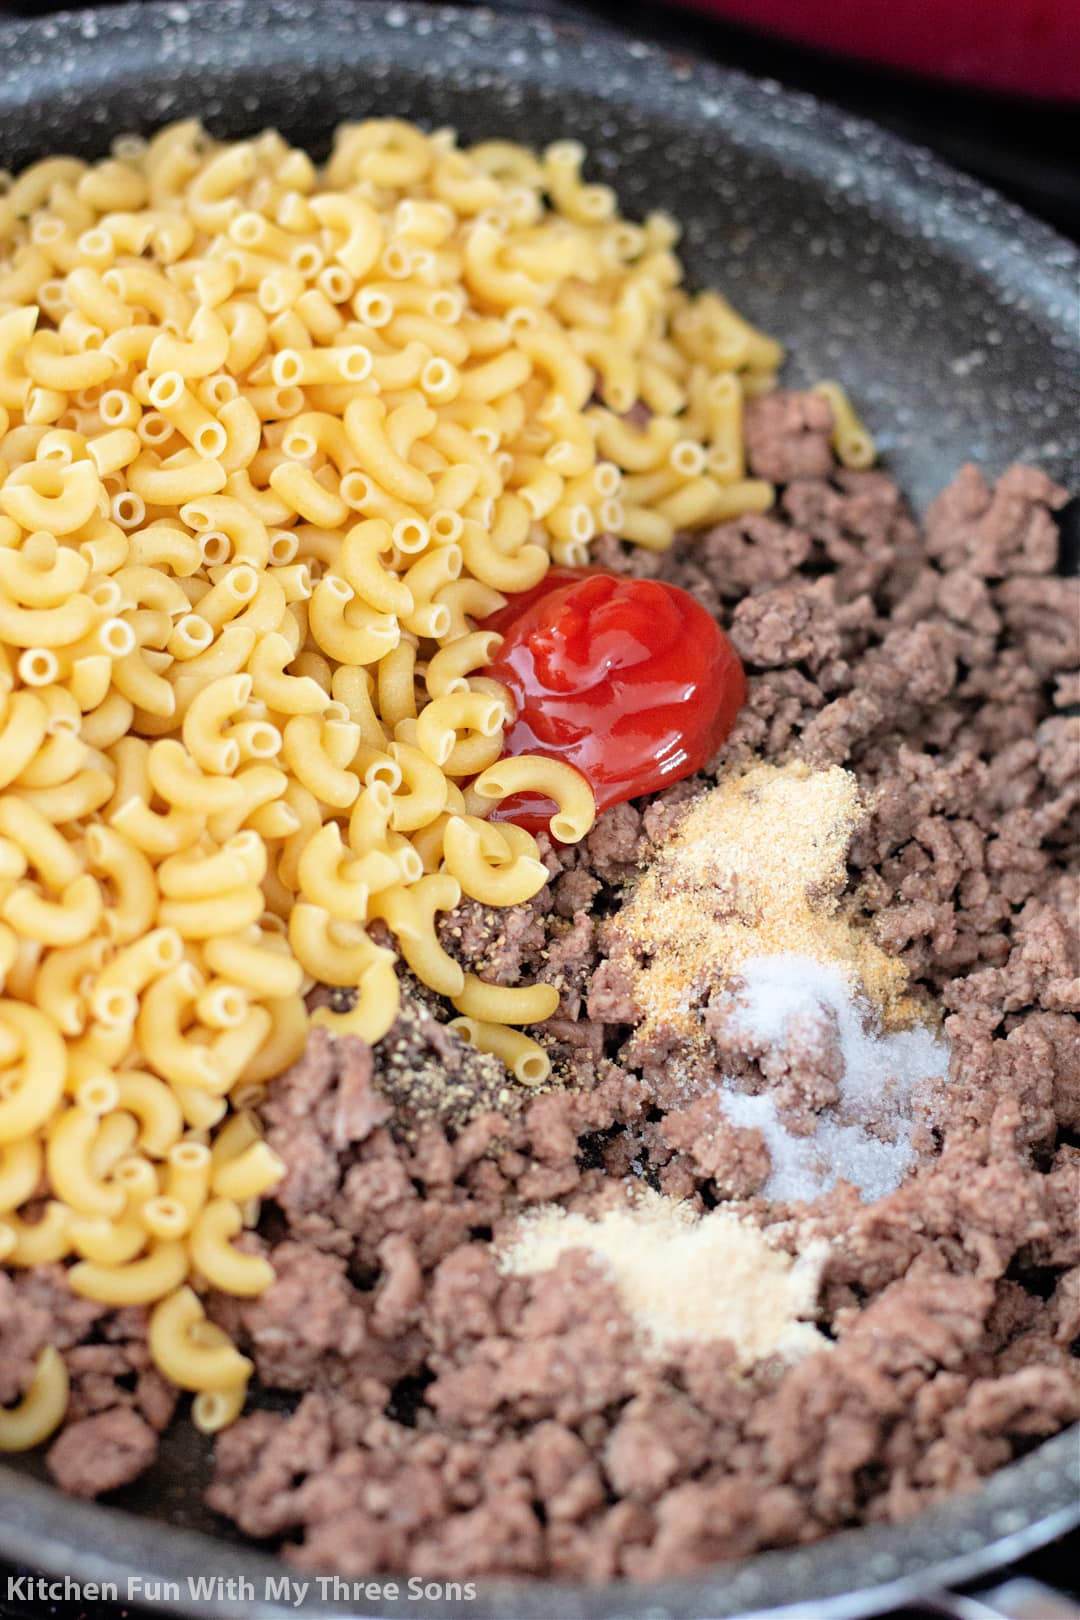 Uncooked macaroni noodles inside of a skillet with ground beef, ketchup and various seasonings